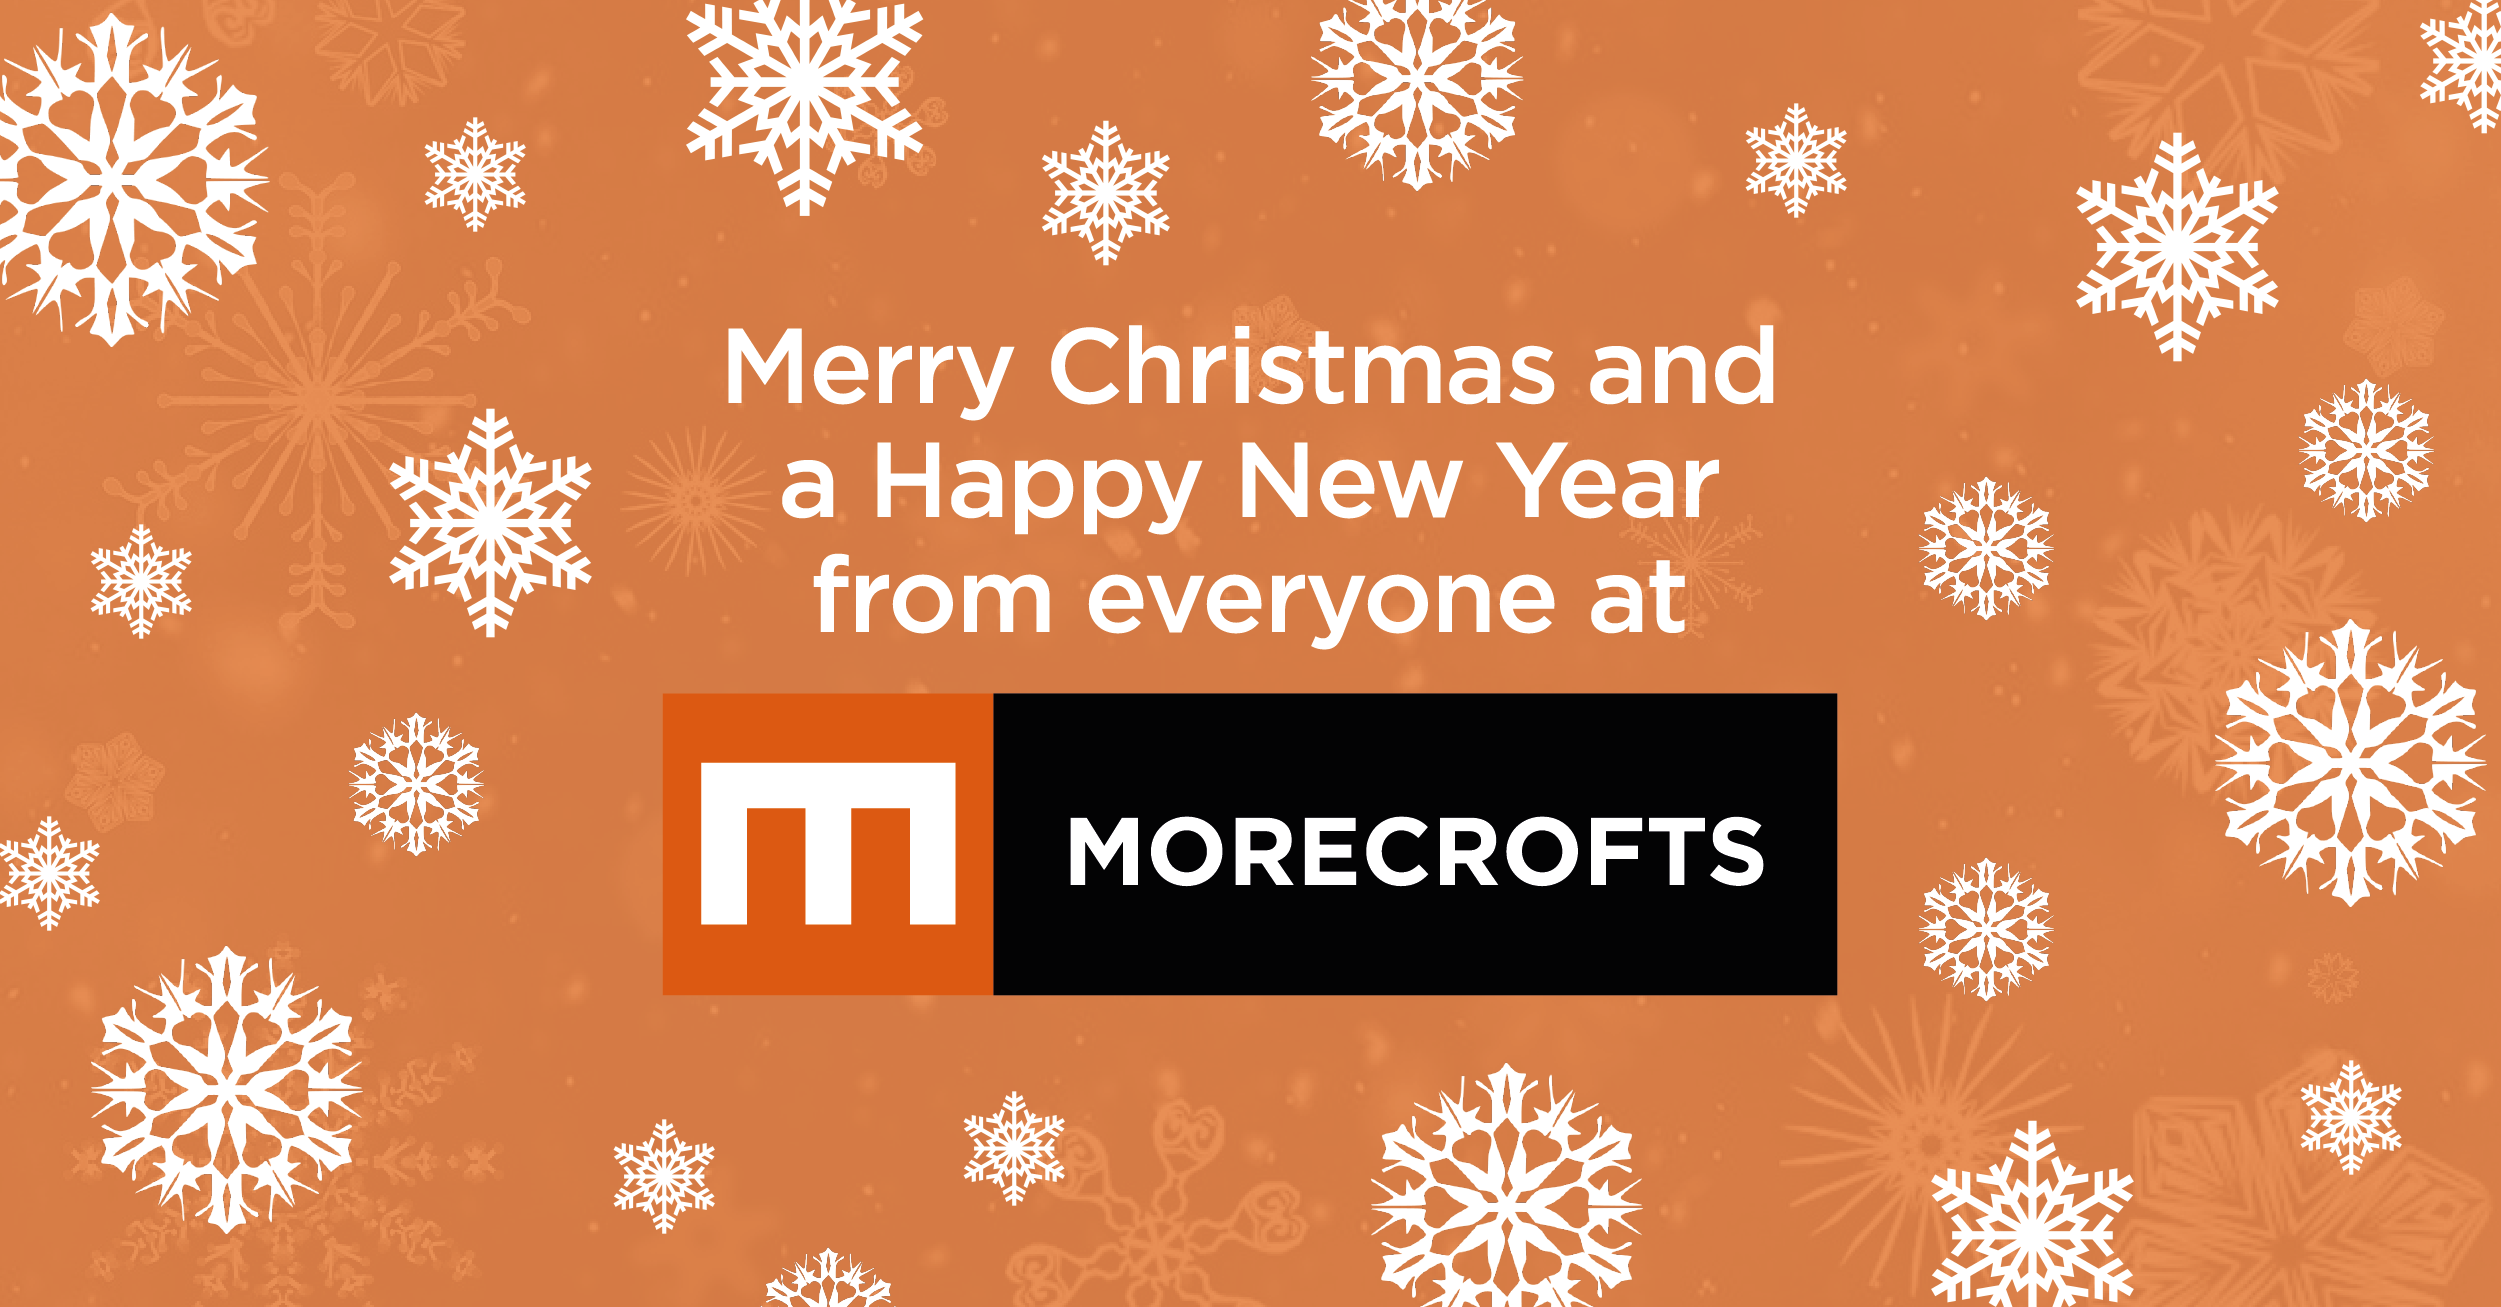 Merry Christmas from Morecrofts